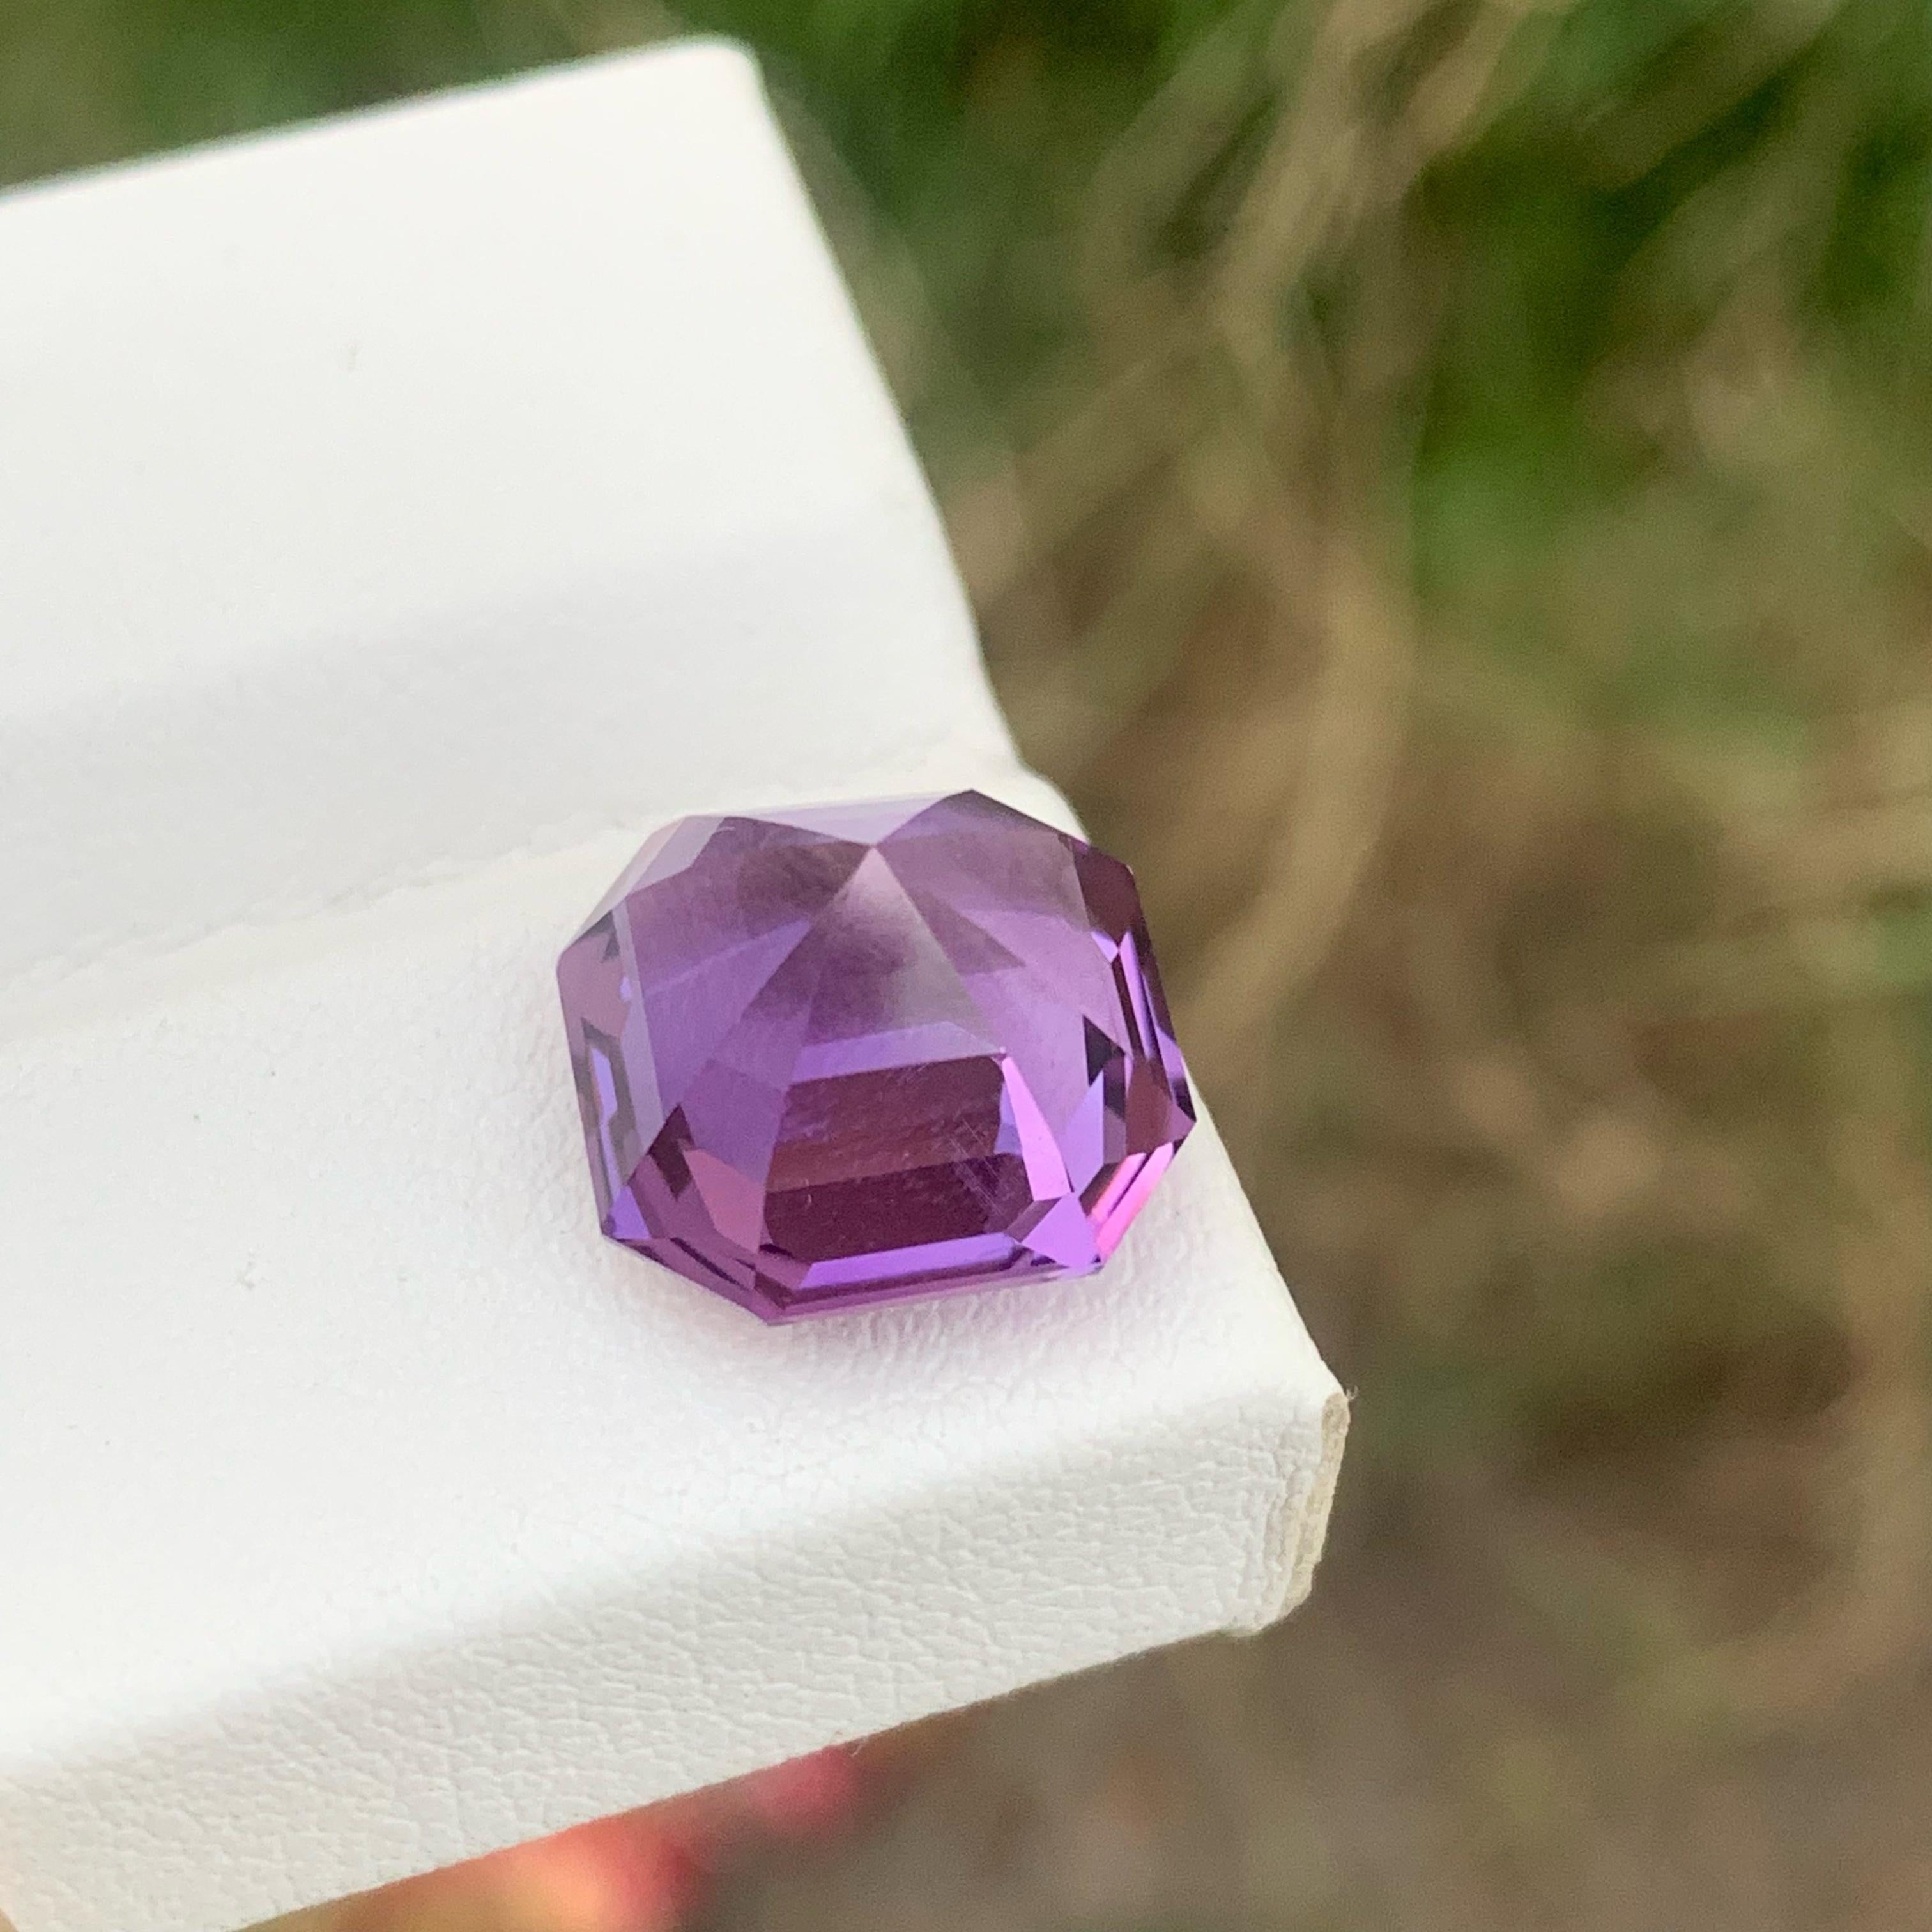 Weight 7.80 carats 
Dimensions 12.2 x 12.1 x 9.3 mm
Treatment None 
Origin Brazil 
Clarity SI (Slightly Included)
Shape Octagon 
Cut Asscher 



Discover the mesmerizing allure of this exquisite 7.80 carat Purple Amethyst gemstone, expertly cut in